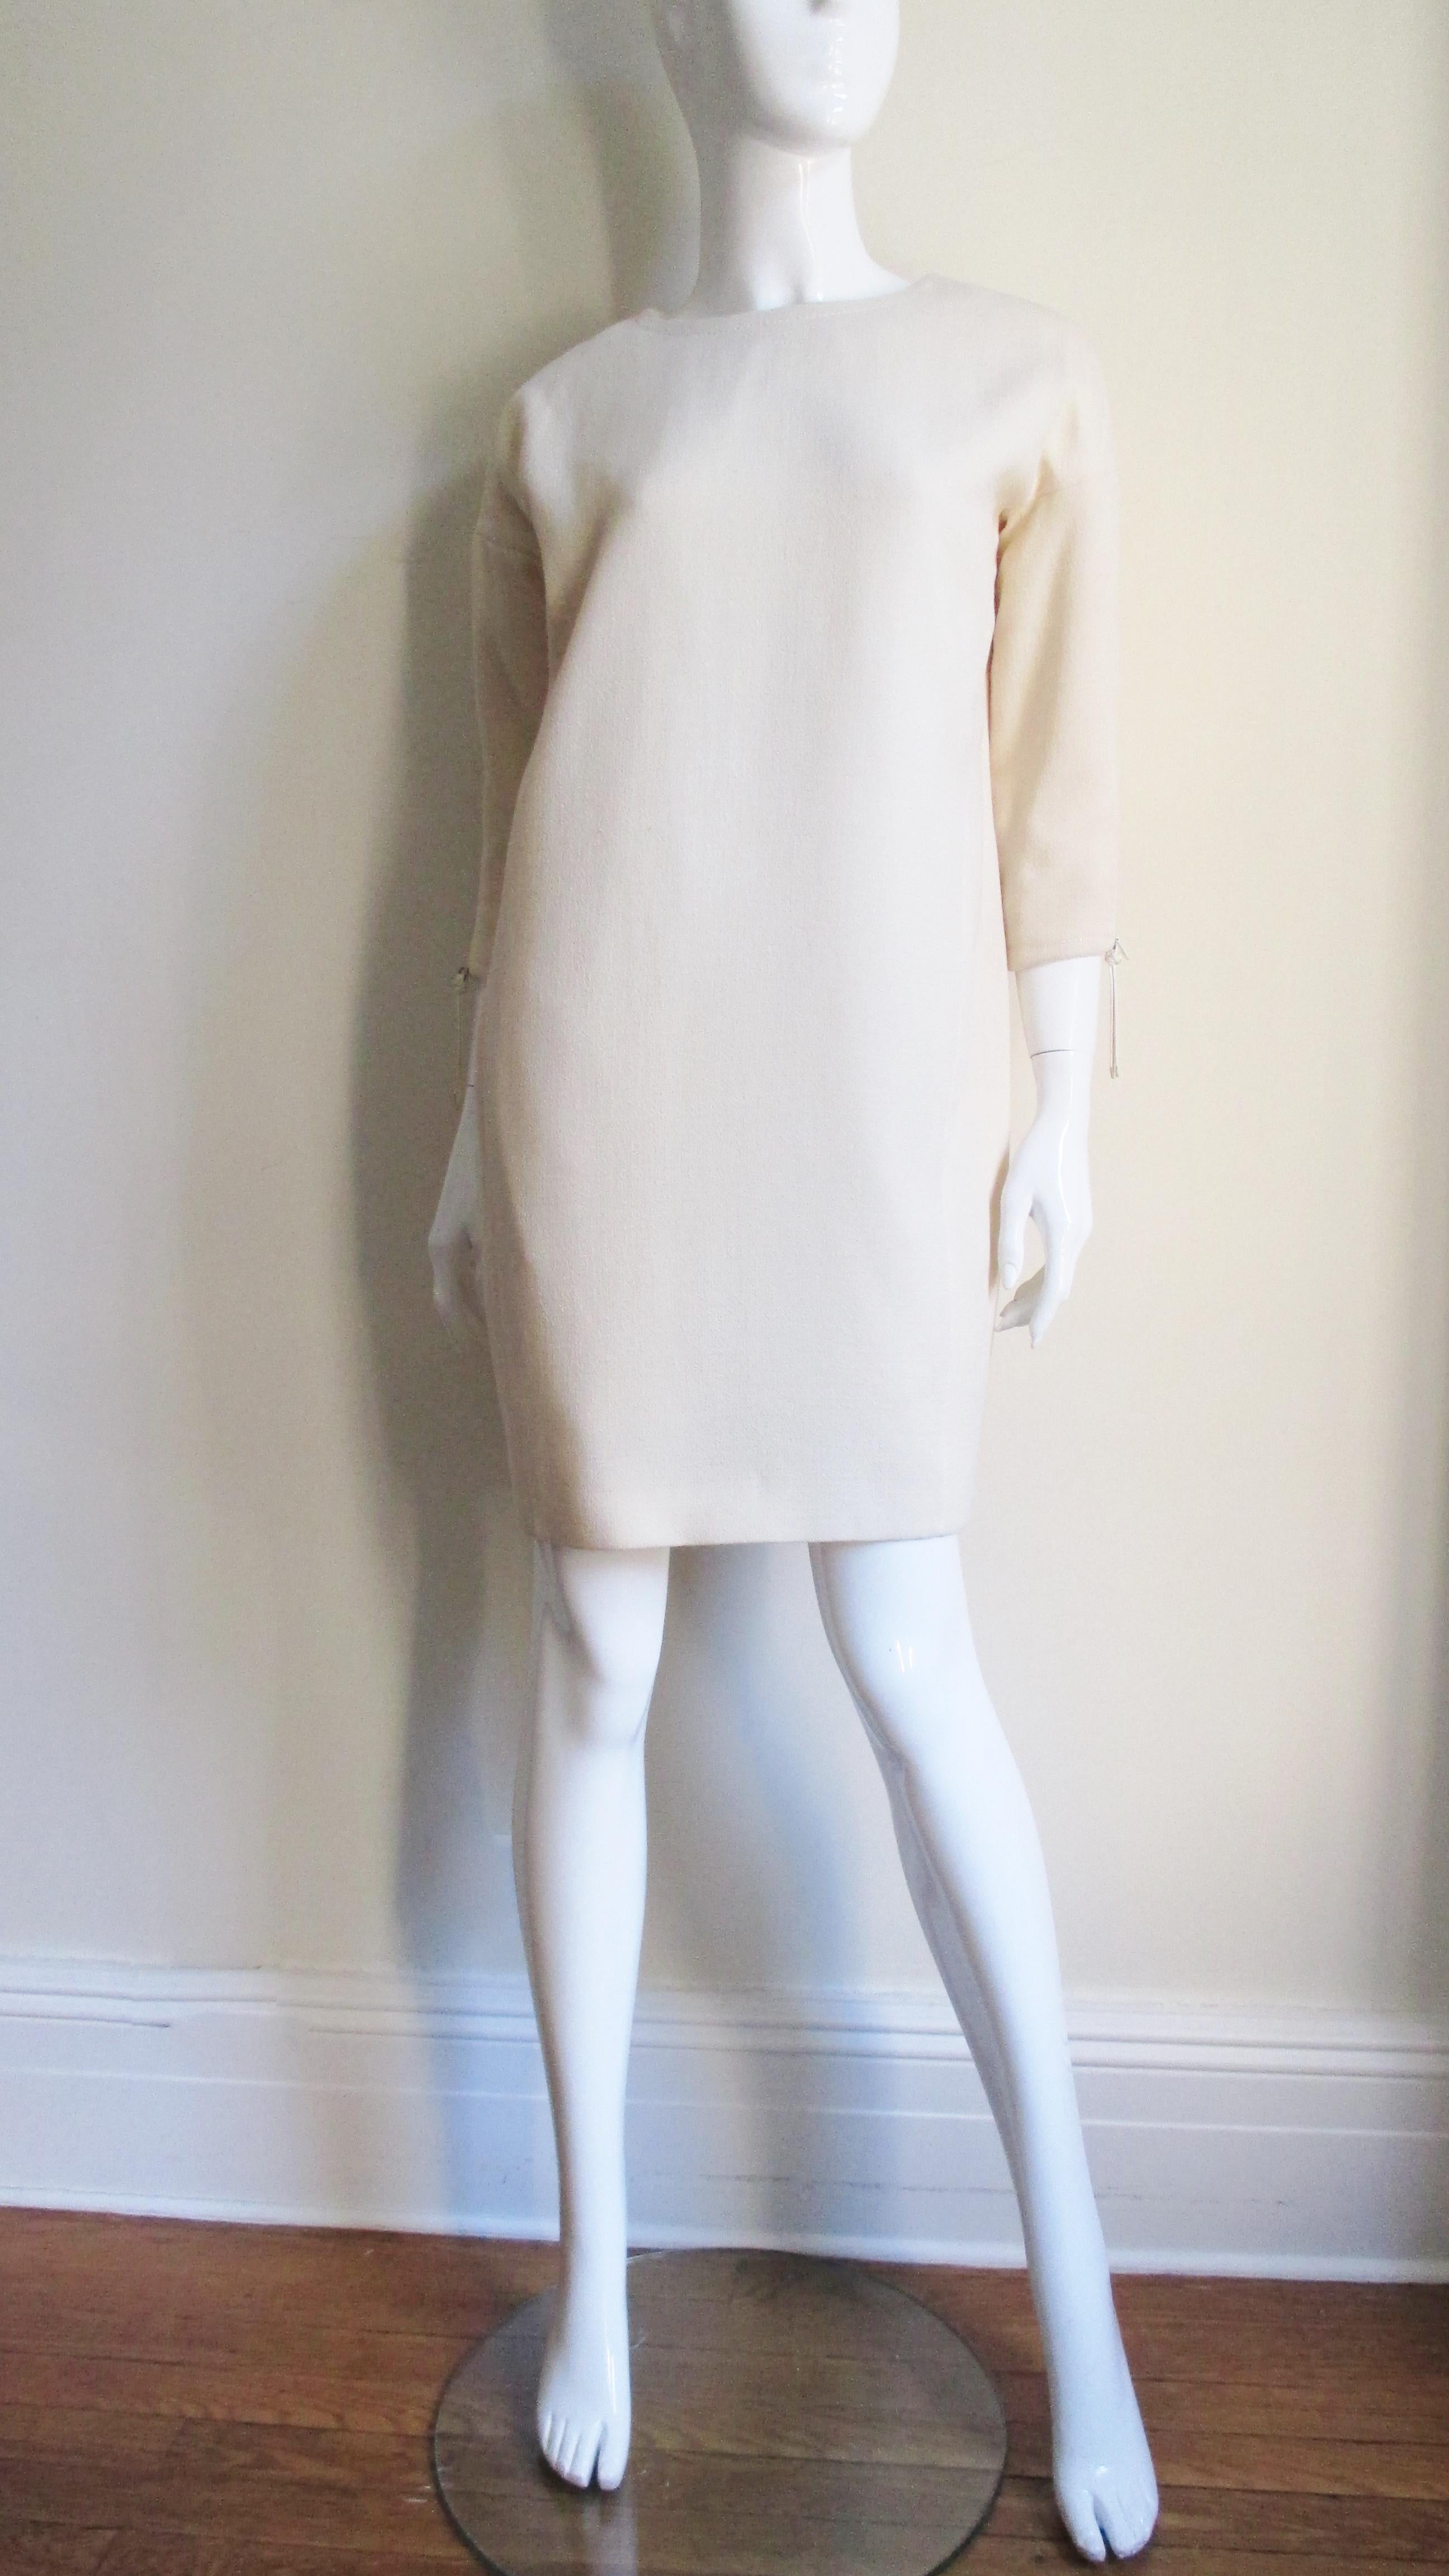  John Galliano for Christian Dior Dress 1990s For Sale 2